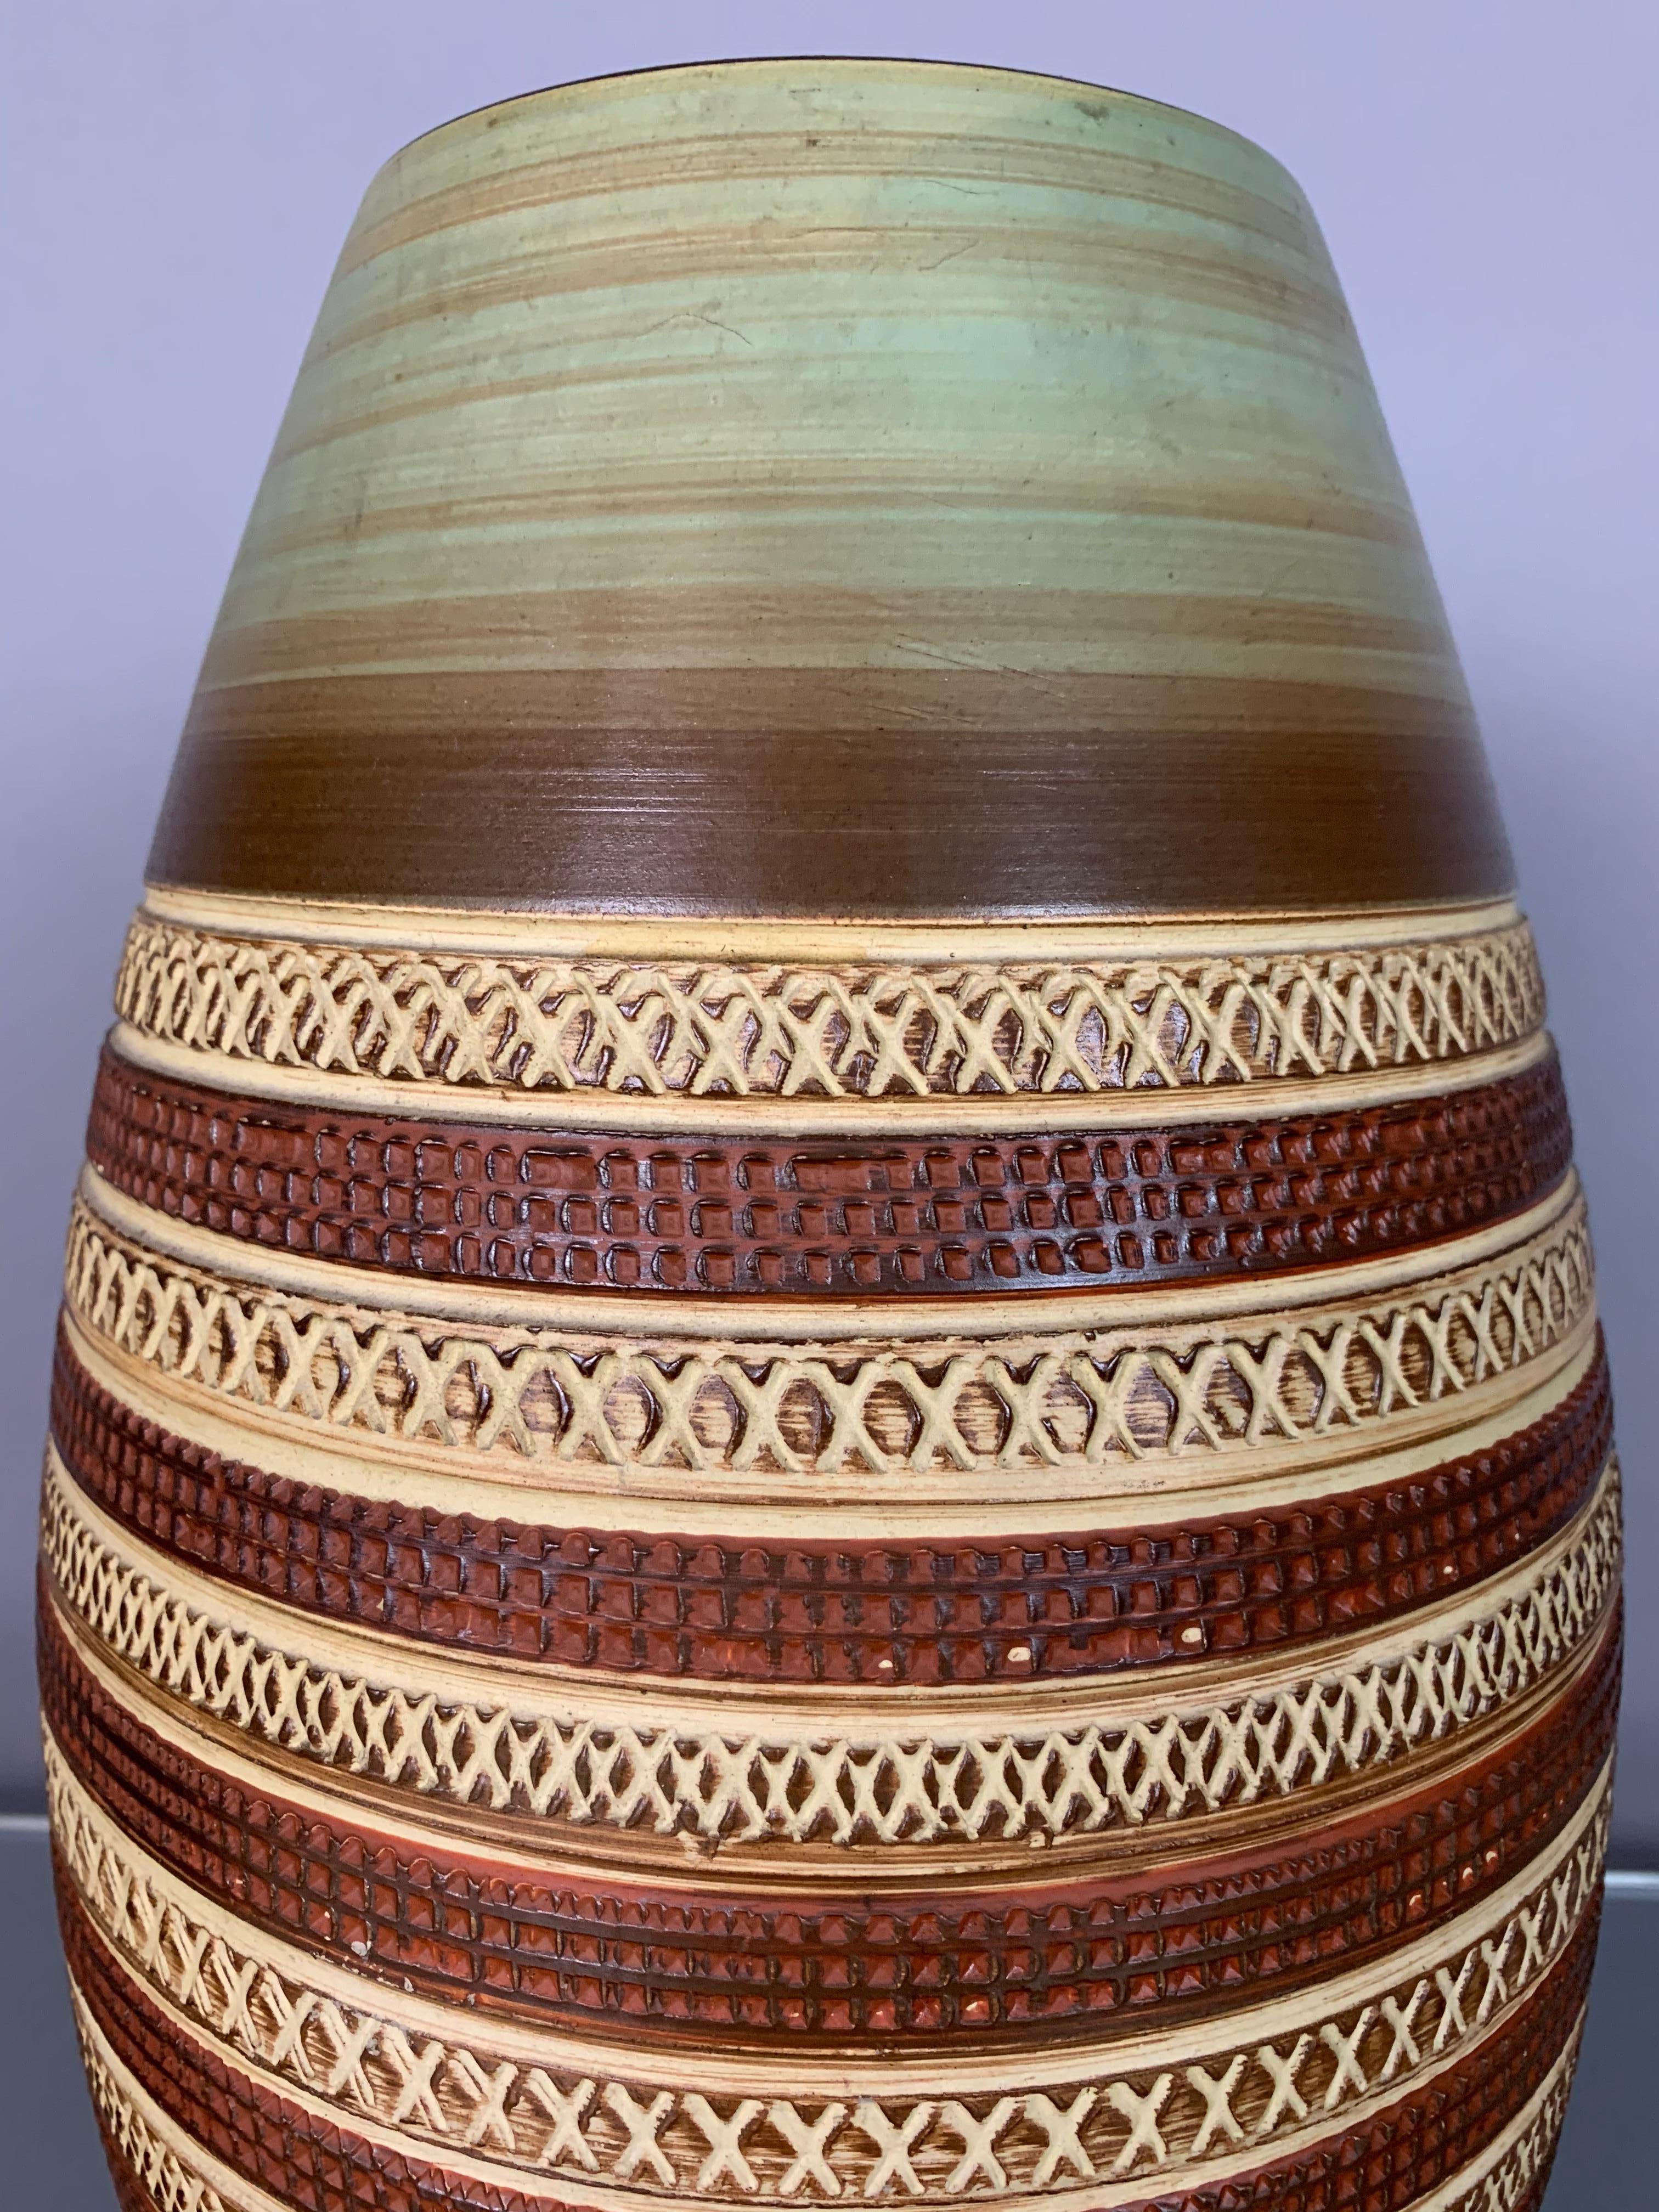 A large West German pottery vase with an interesting, painted, indented, design which runs in horizontal hoops around the outside of the vase. The vase has been painted in autumnal colors of green at the top and bottom and alternating light and dark